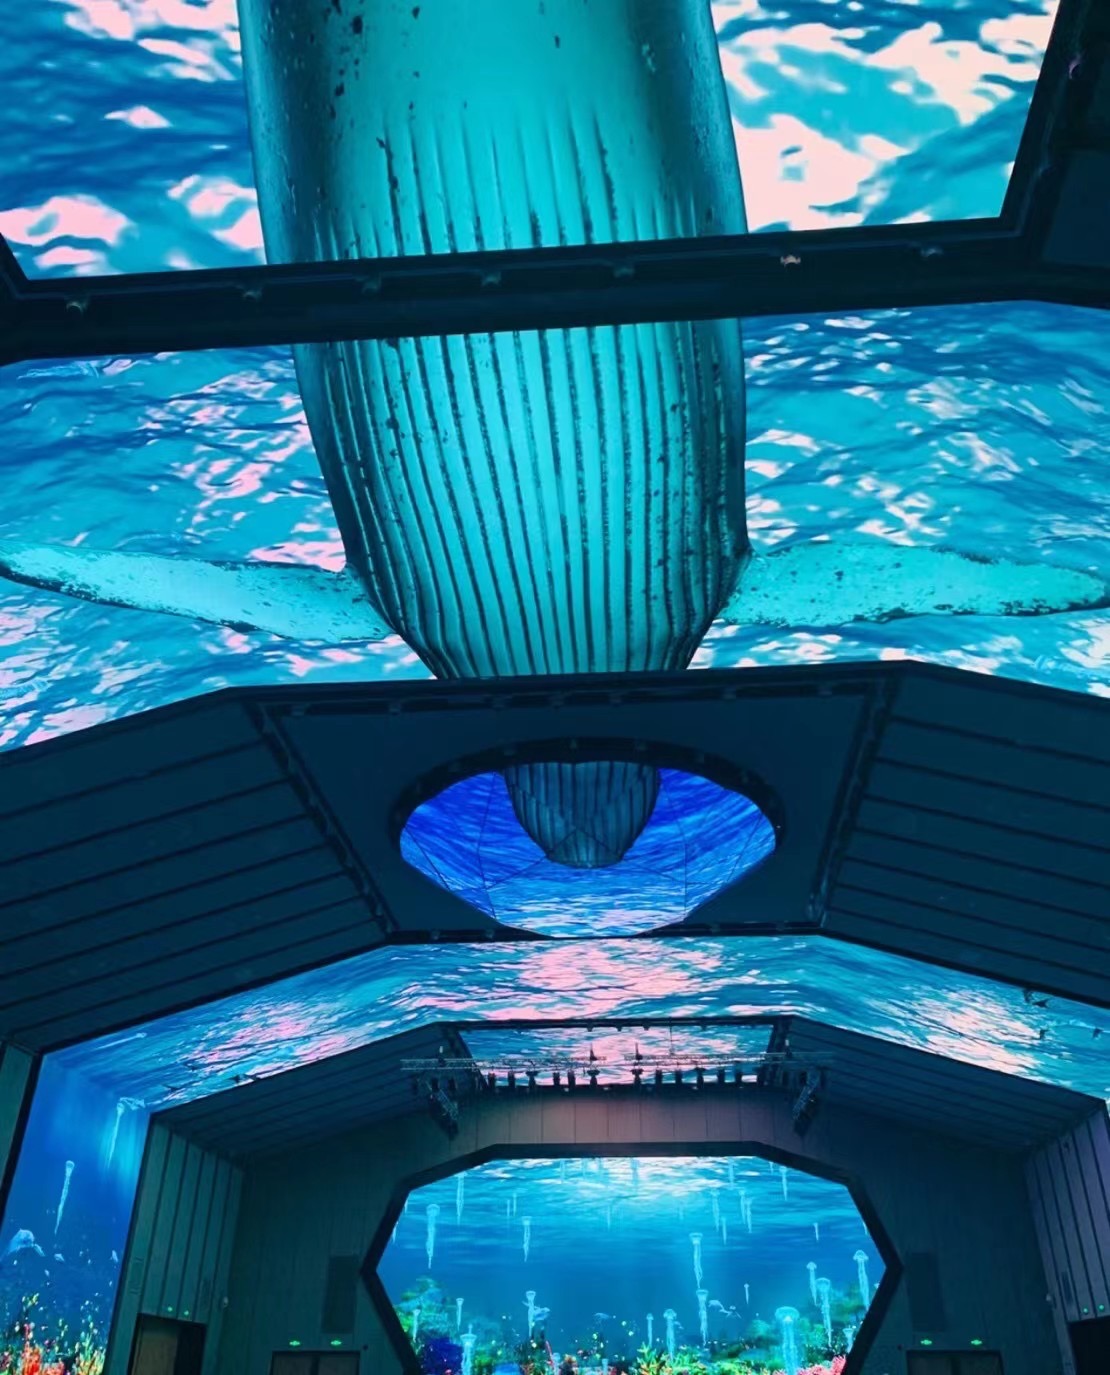 The sky screen LED display is usually used in places such as the Aquarium to attract tourists and improve the environment.